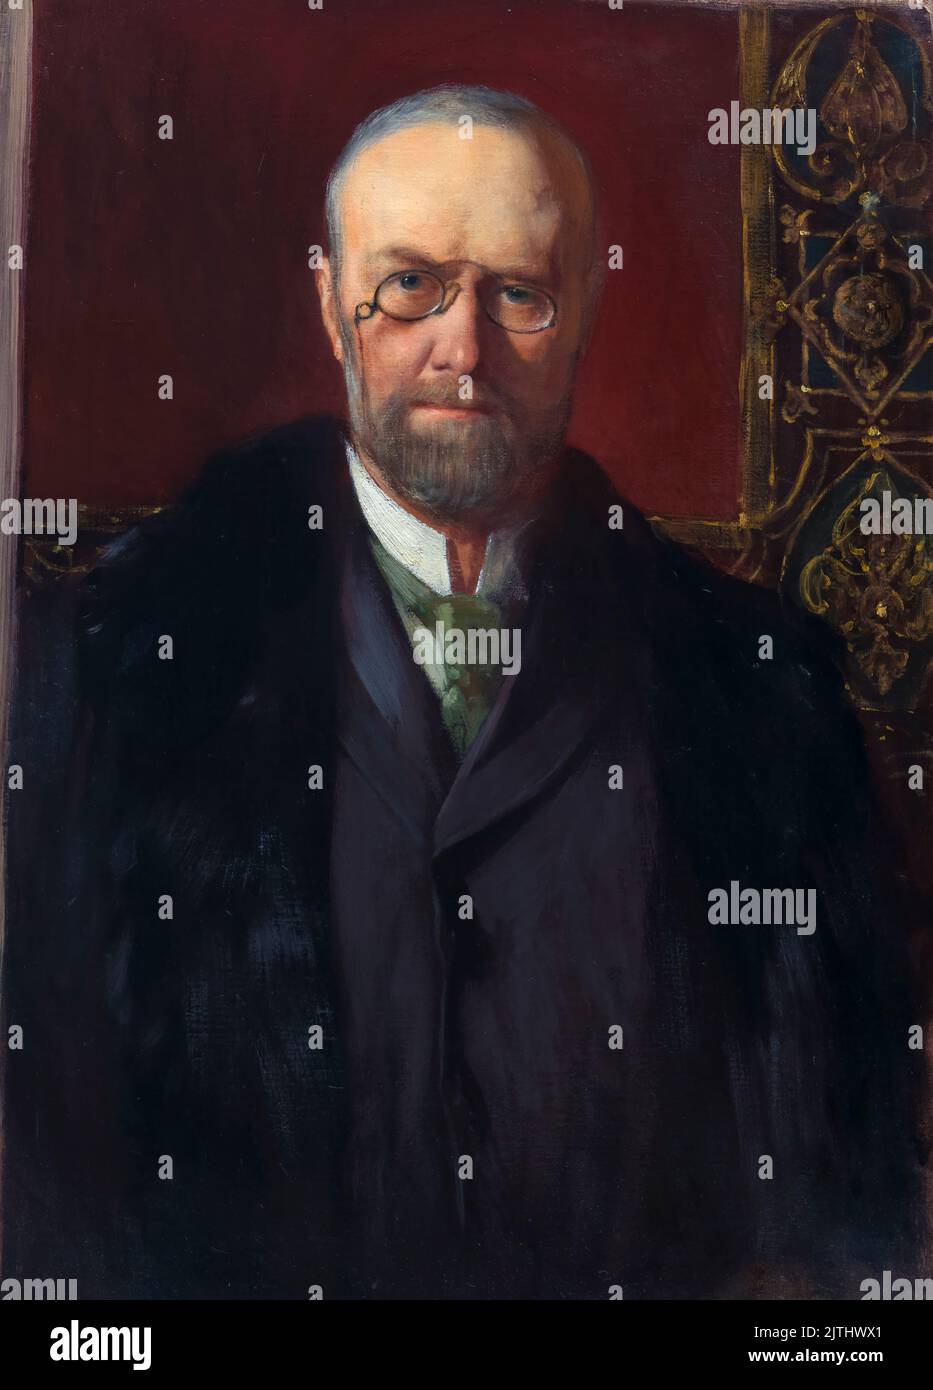 John Brooks Henderson (1826-1913), United States senator from Missouri and a co-author of the Thirteenth Amendment to the United States Constitution which abolished slavery, portrait painting in oil on canvas by Jean Joseph Benjamin-Constant, 1895 Stock Photo